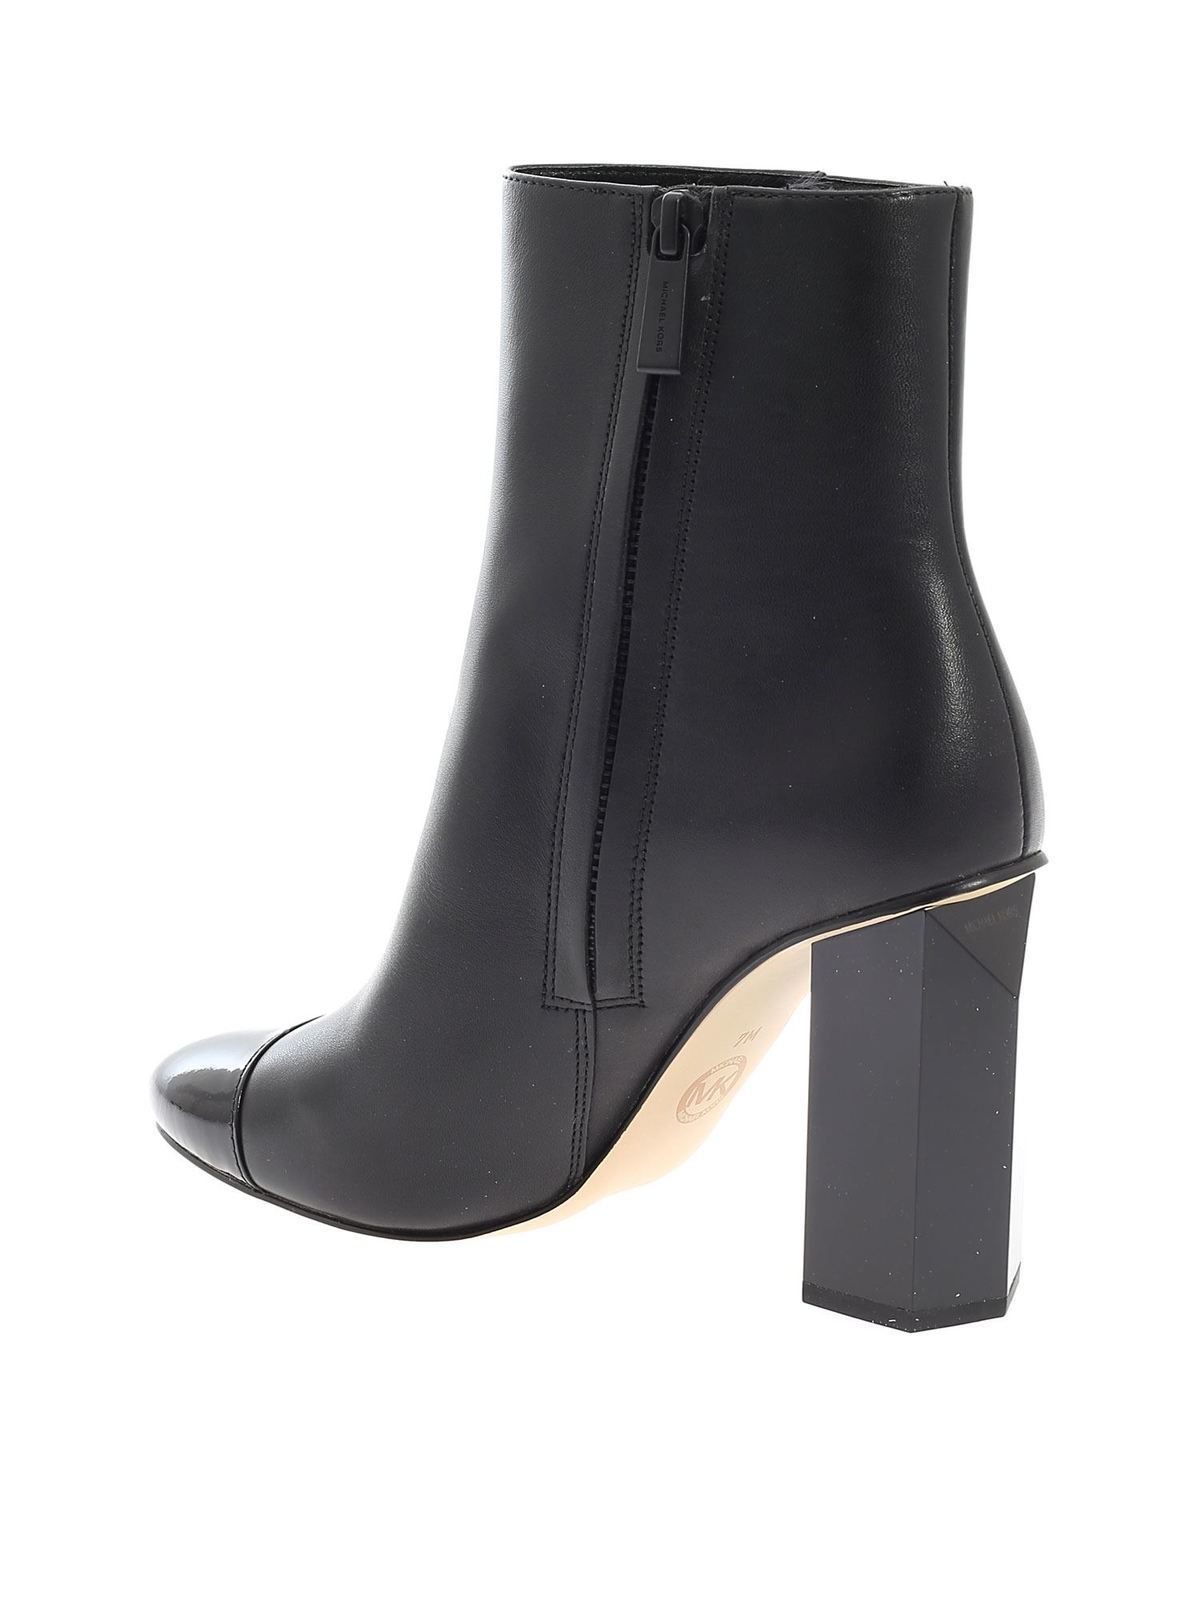 Ankle boots Michael Kors - Petra Toe Cap Bootie ankle boot in black -  40T0PEHE6LBLACK